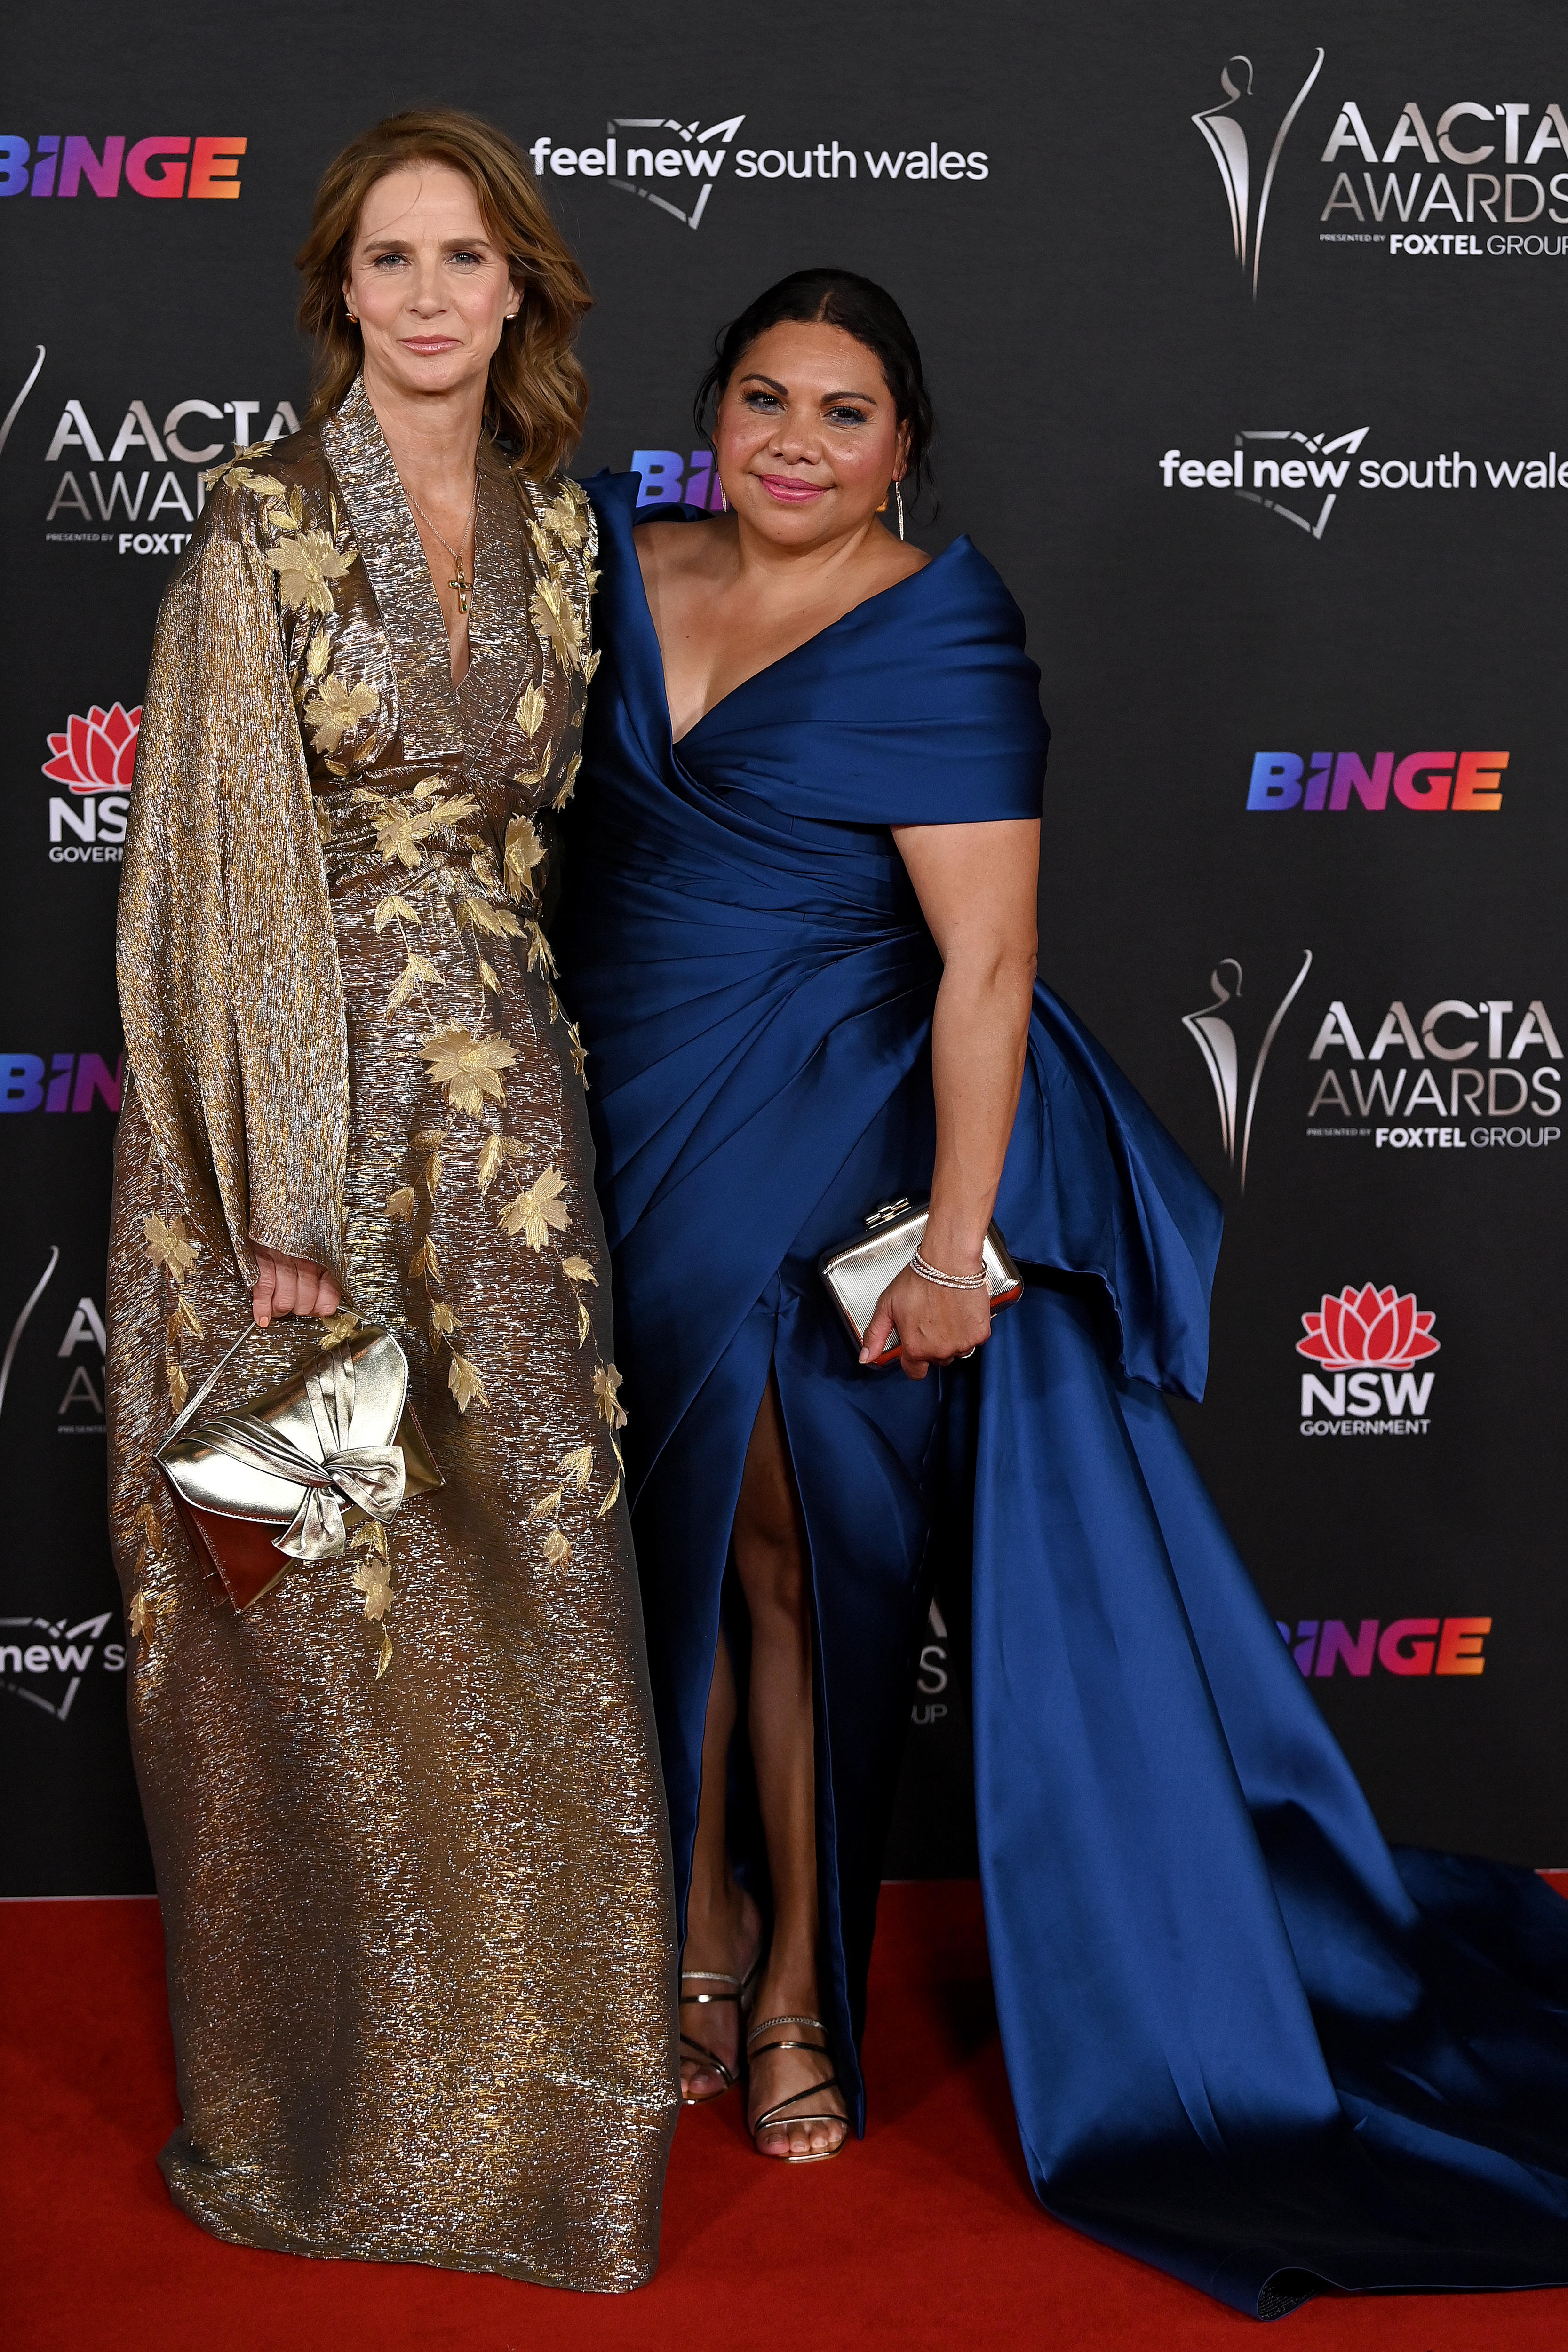 A woman in a gold and silver frock with a woman in a long blue ball gown at a red carpet event 